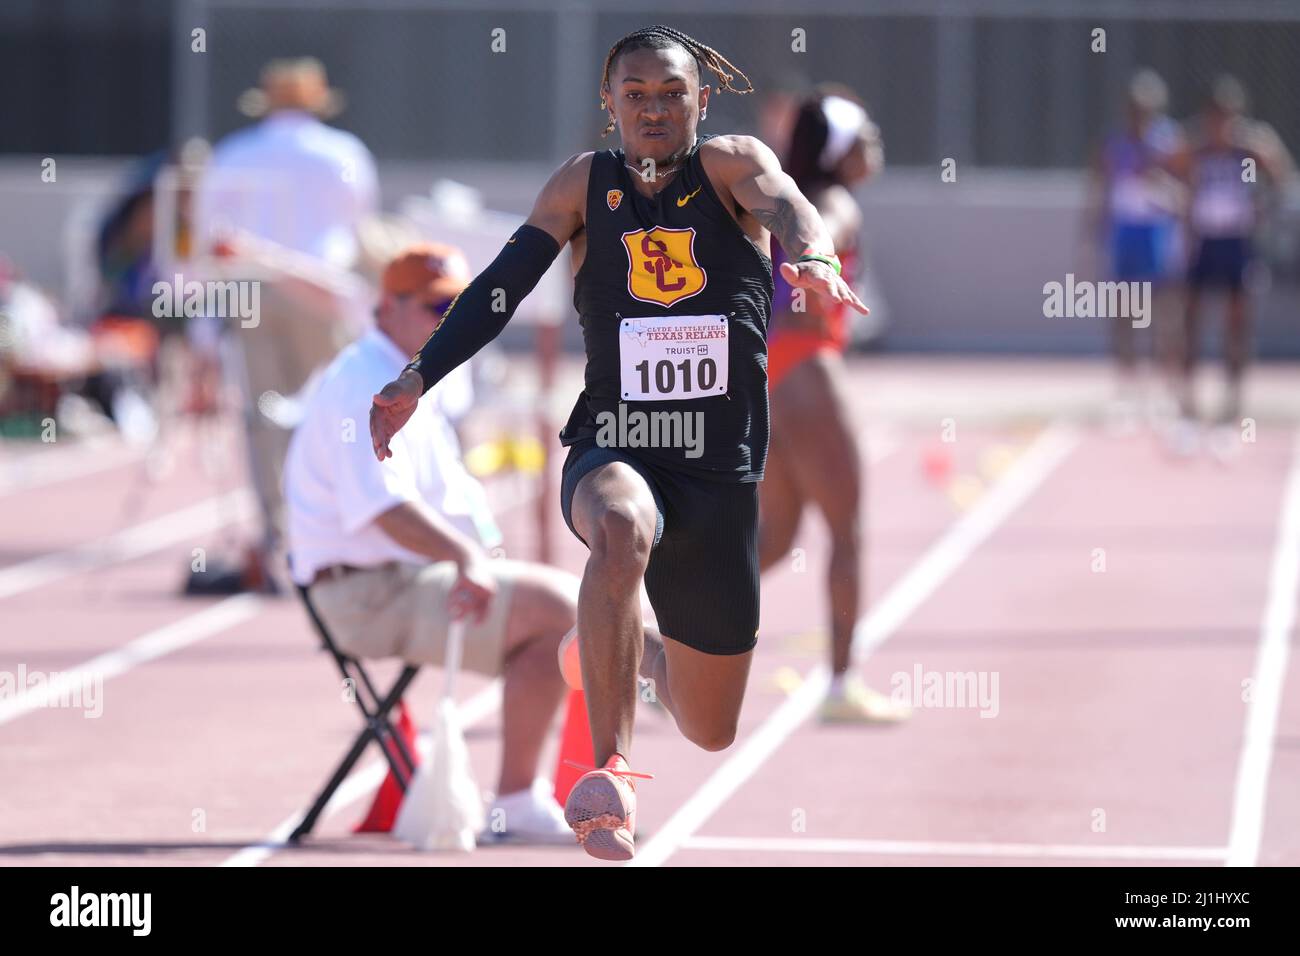 Jalyn Jackson of Southern California places fifth in the triple jump at 51-7 (15.72m) during the 94th Clyde Littlefield Texas Relays, Friday, Mar 25, Stock Photo